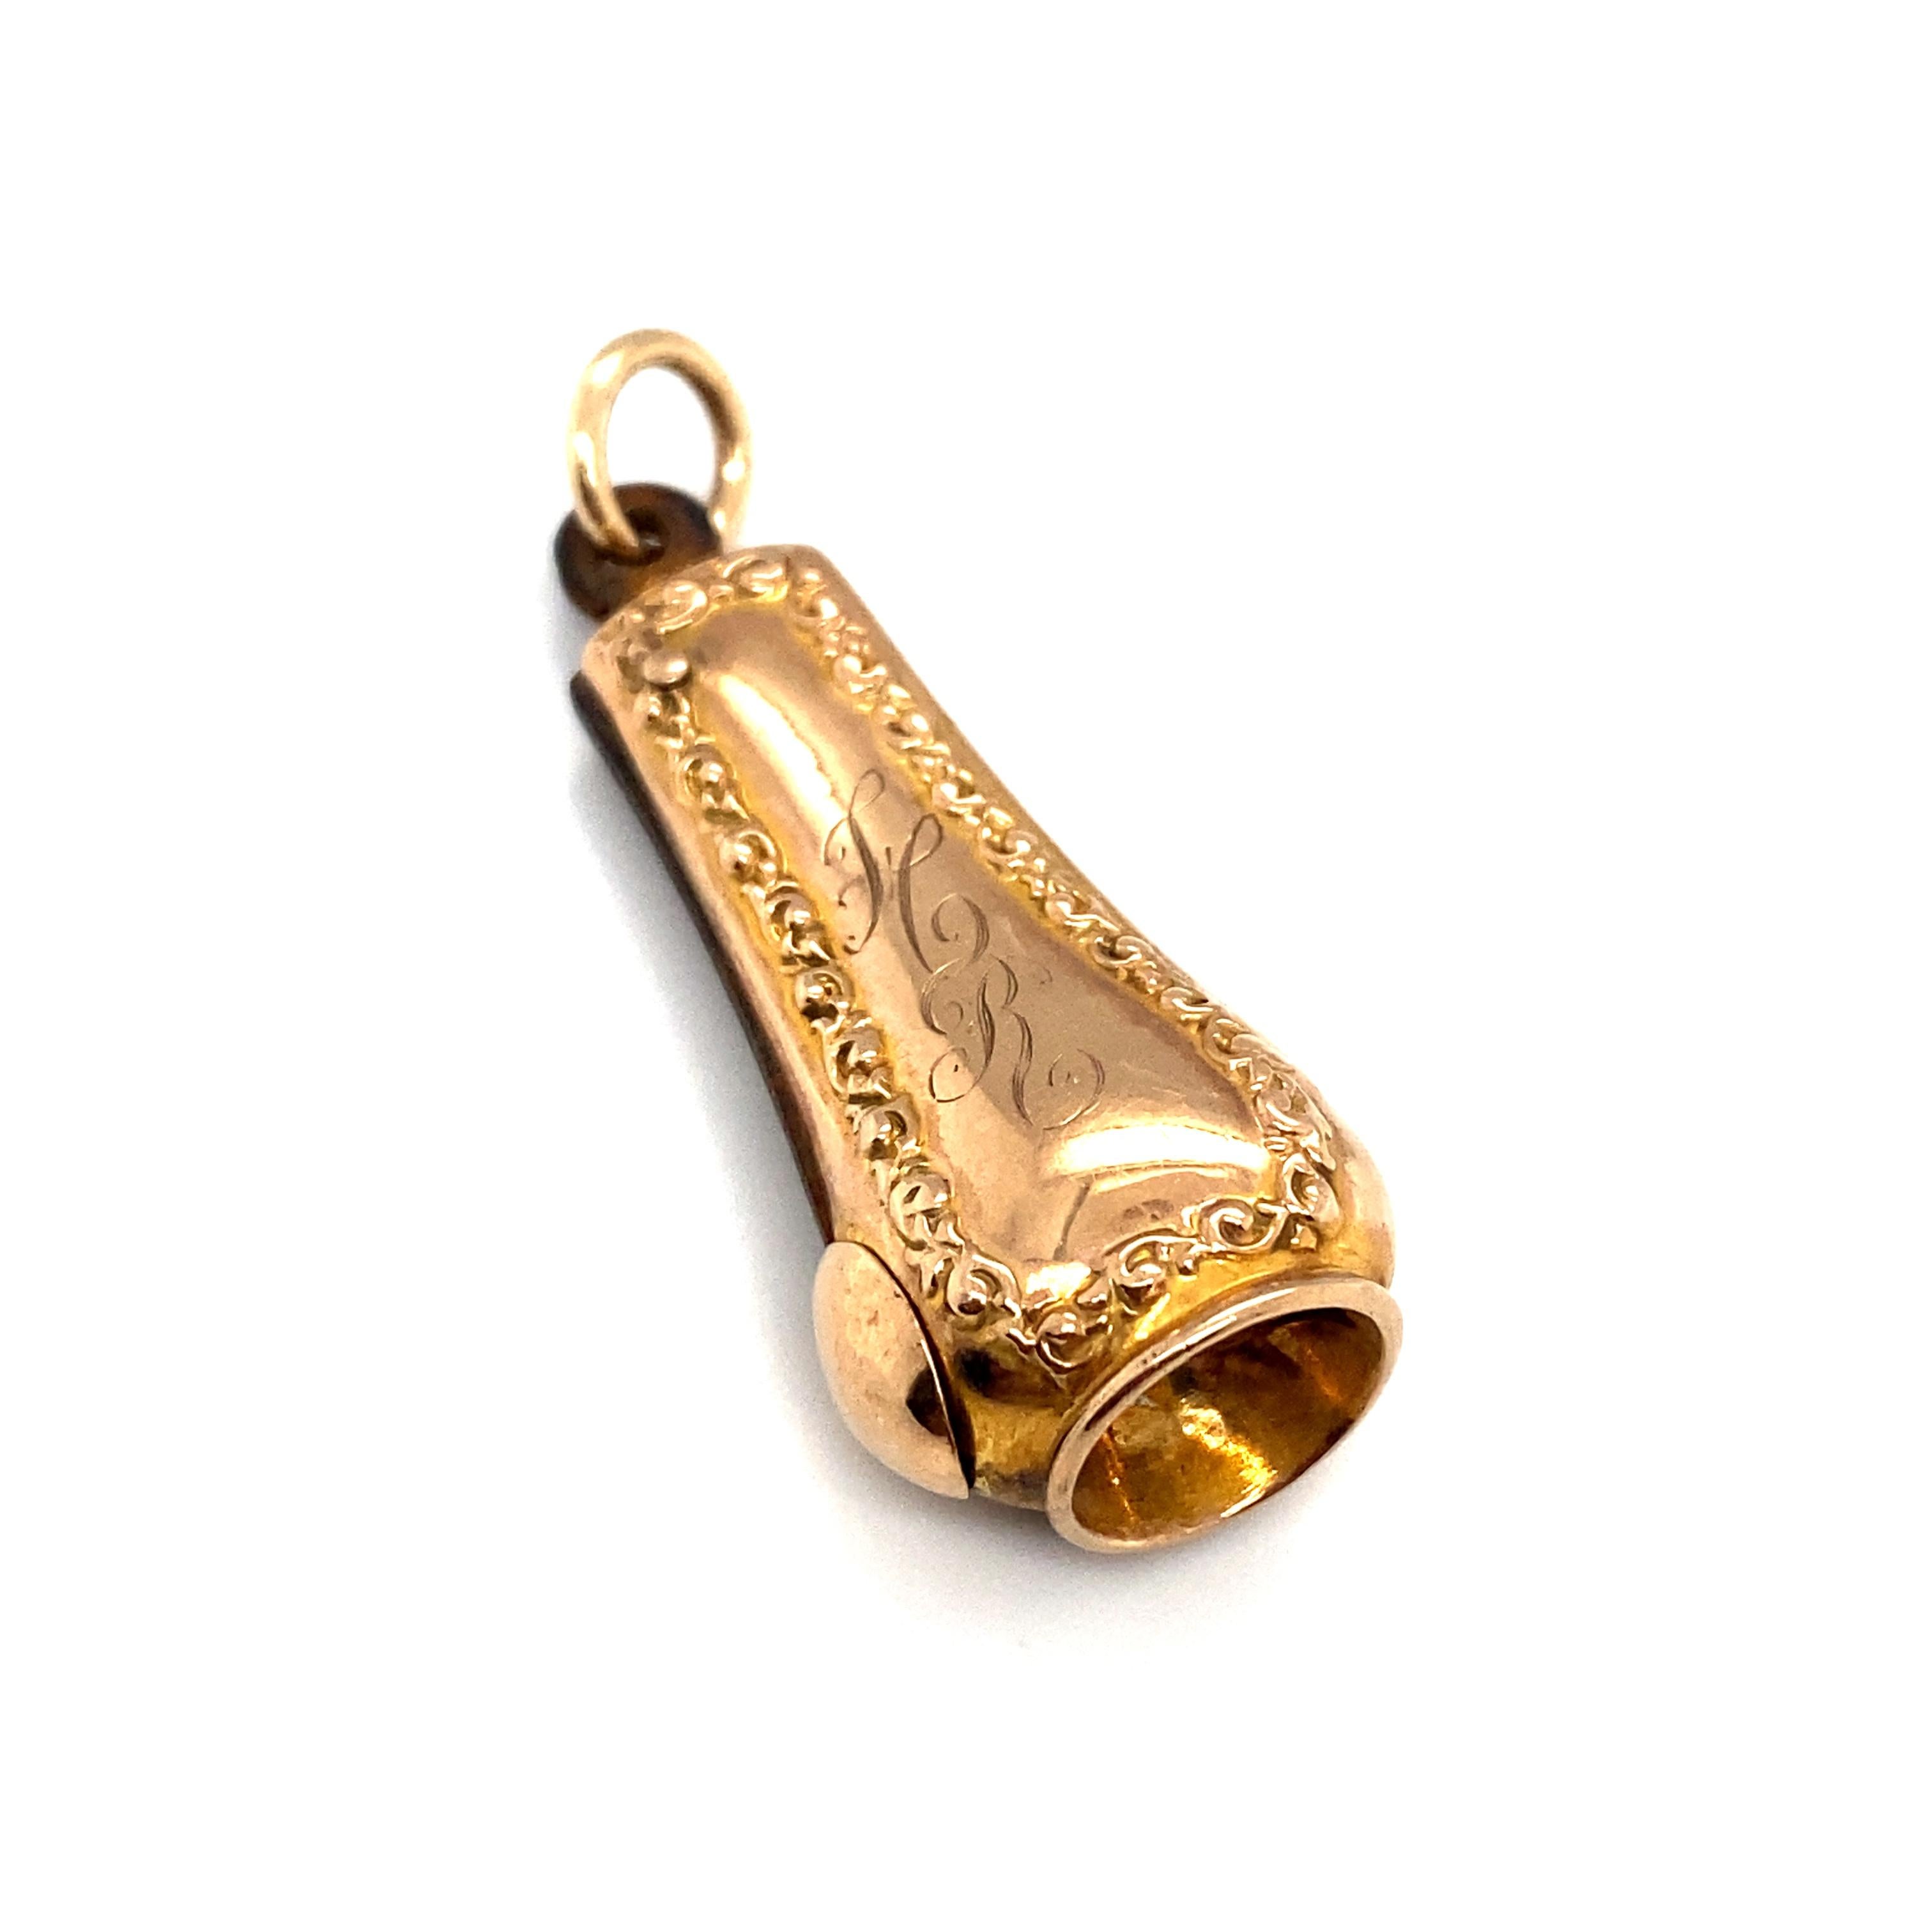 Item Details: This cigar cutter charm has an engraved monogram HR and is decorated with floral repousse. Made in France.

Circa: 1890s
Metal Type: 10 karat yellow gold
Weight: 5.3 grams
Size: 1.75